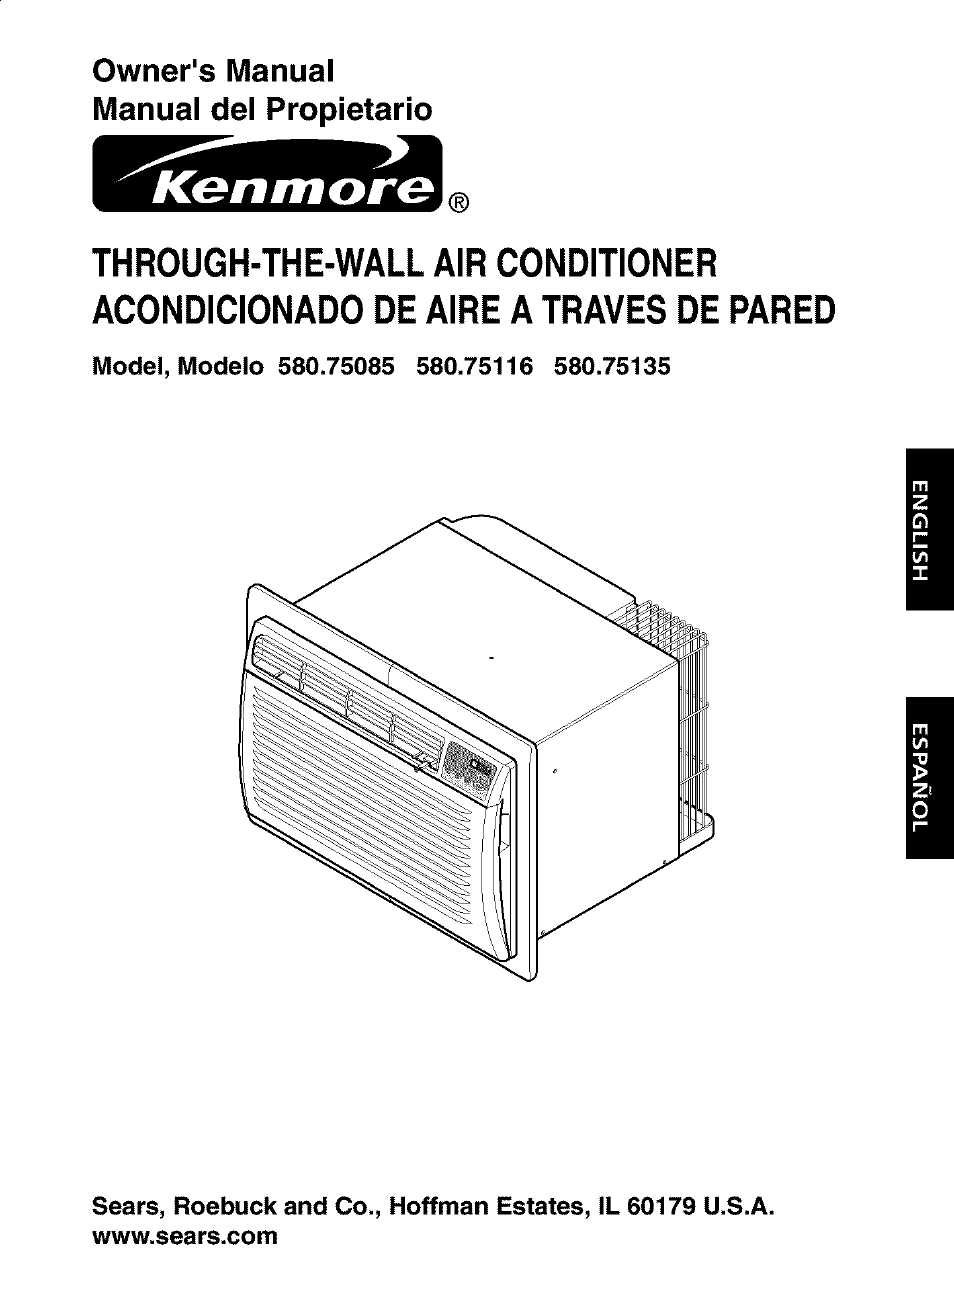 Kenmore 580.75116 User Manual | 40 pages